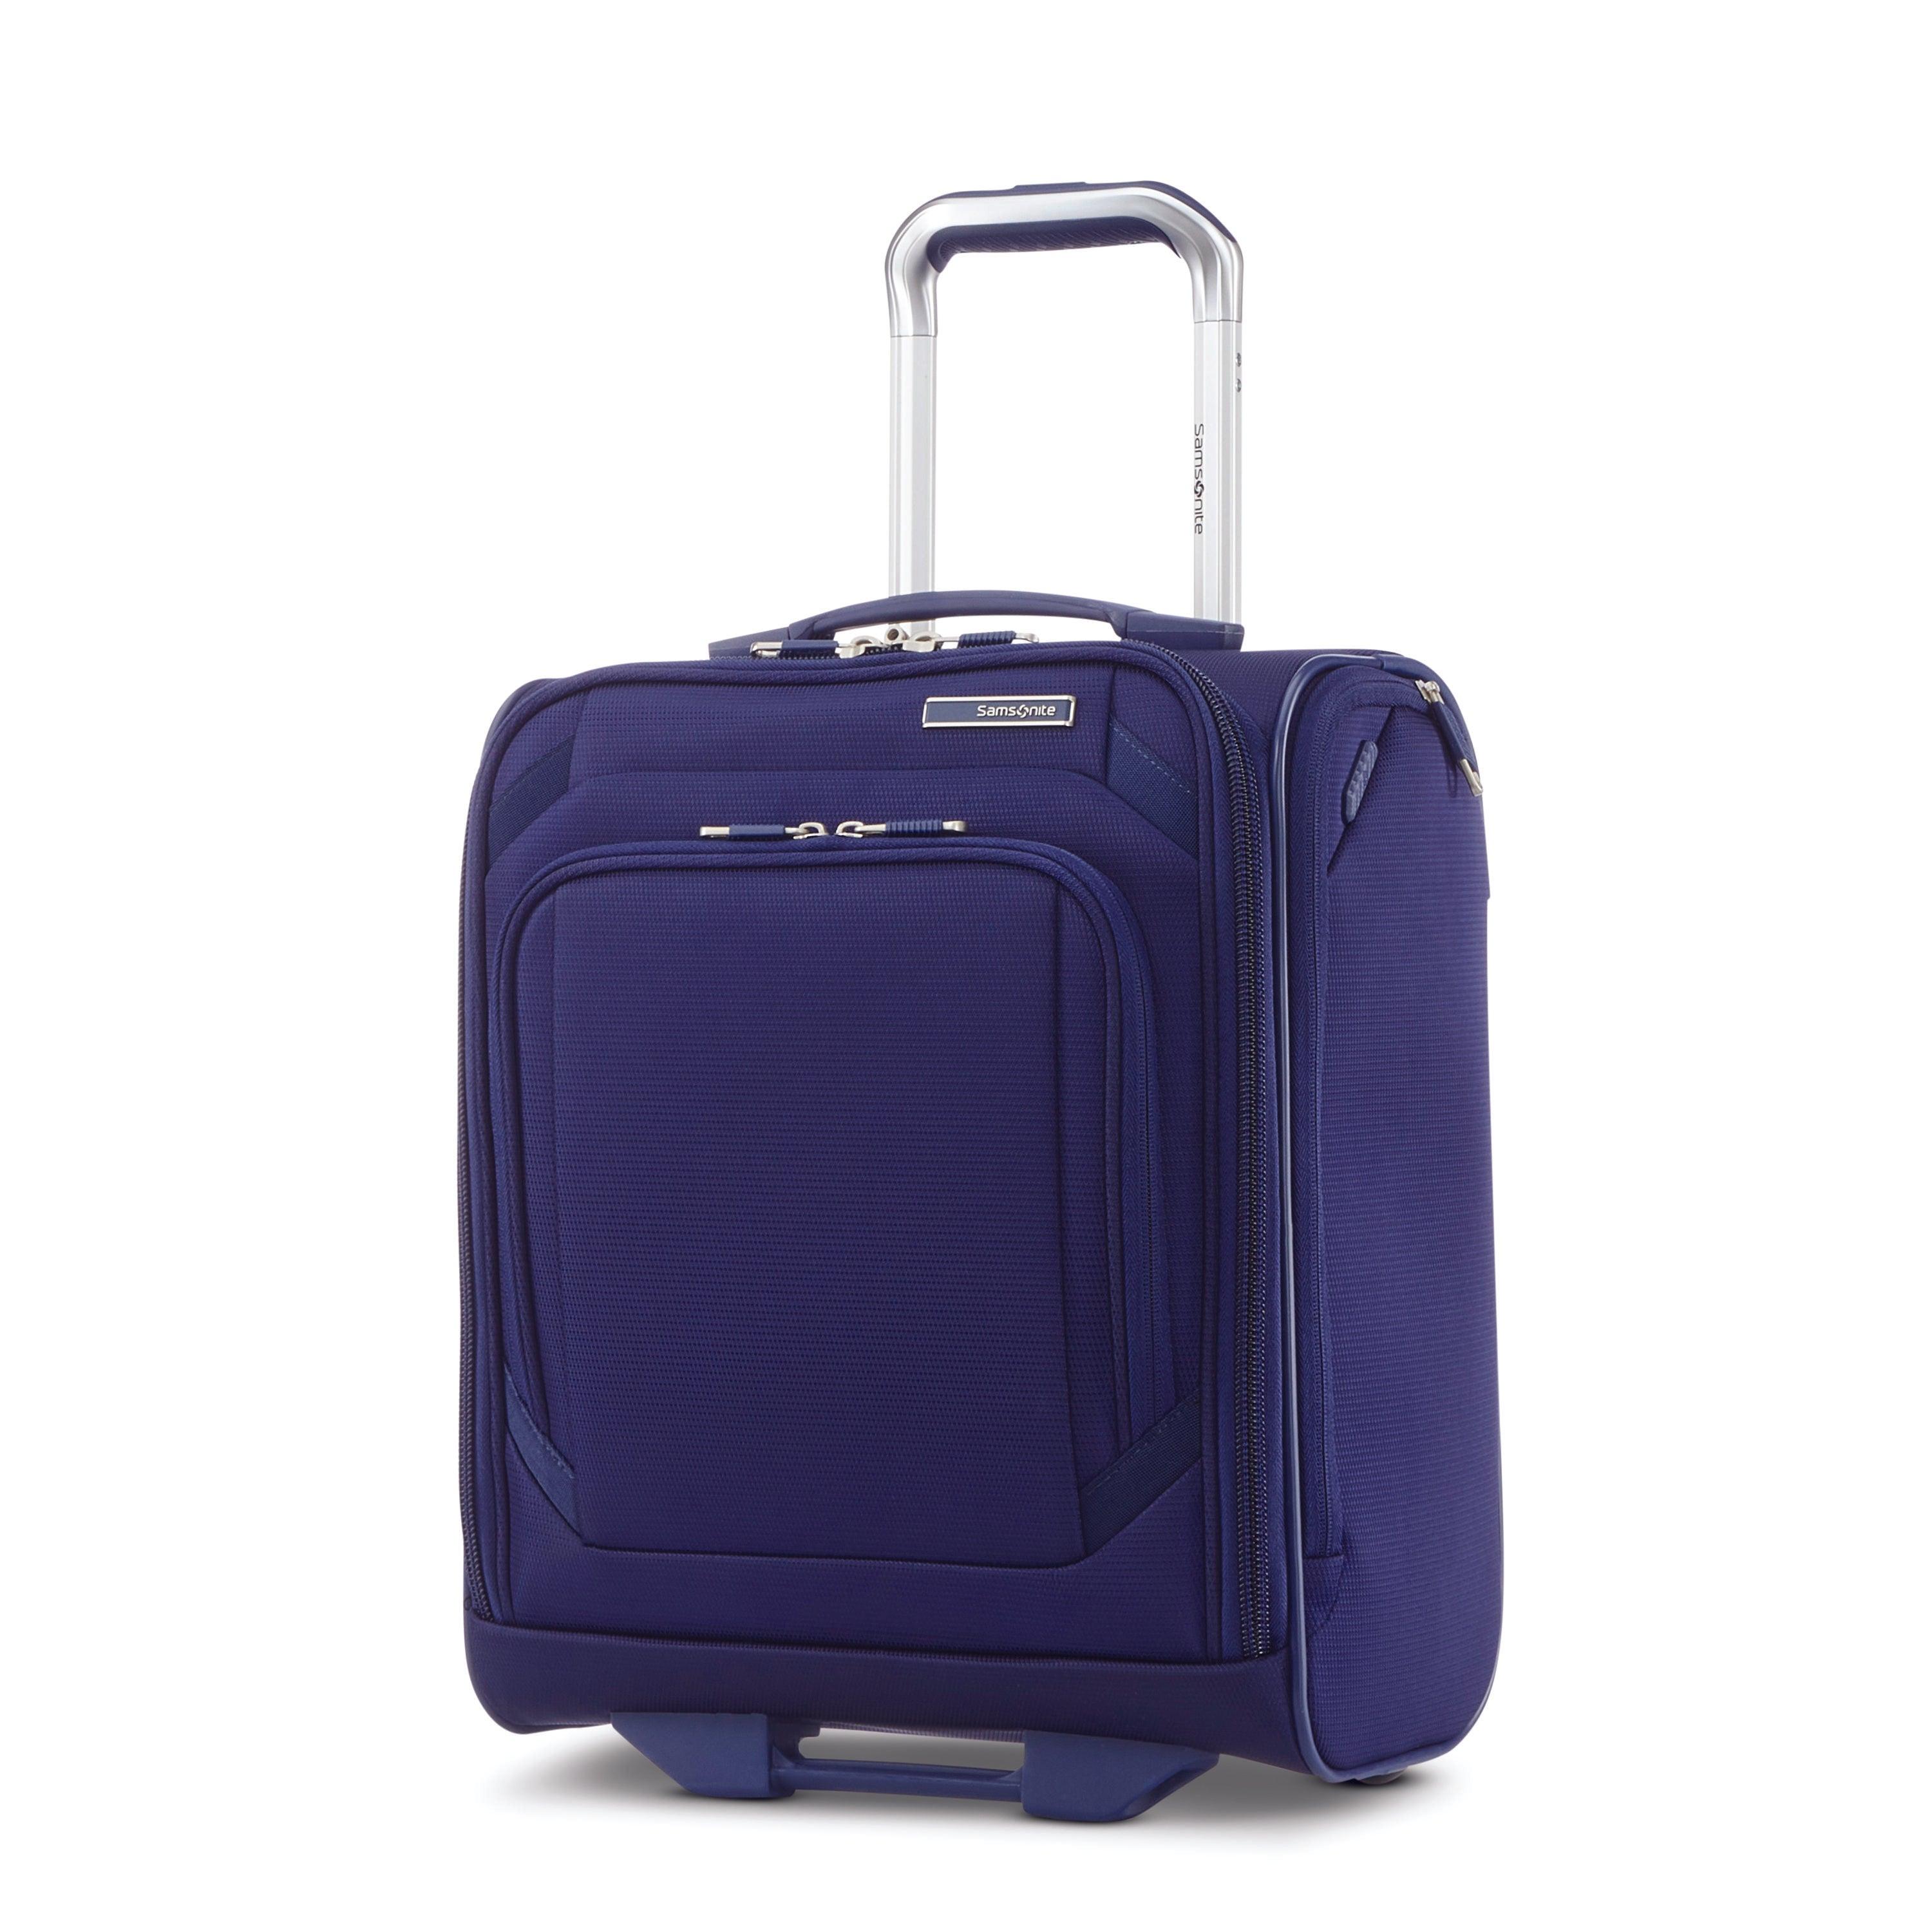 Ascentra 2W Underseater 17.75" - Voyage Luggage